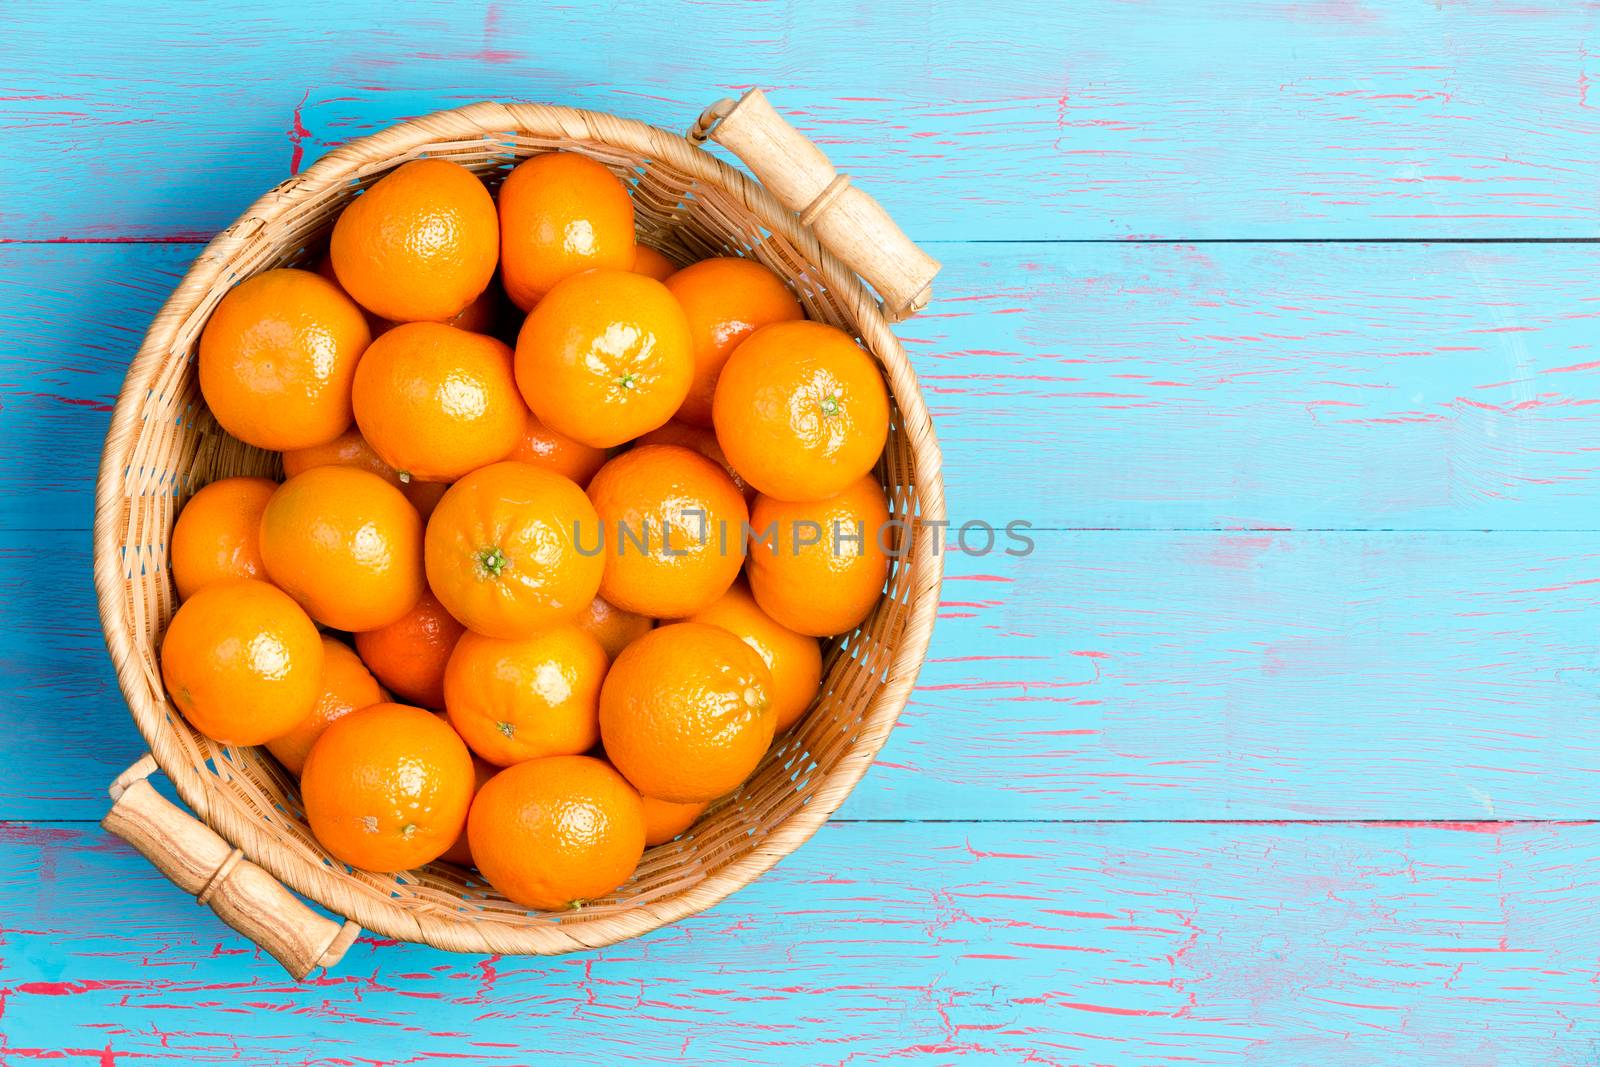 Top down first person perspective view of straw basket filled with clementine oranges over painted blue wooden table with copy space